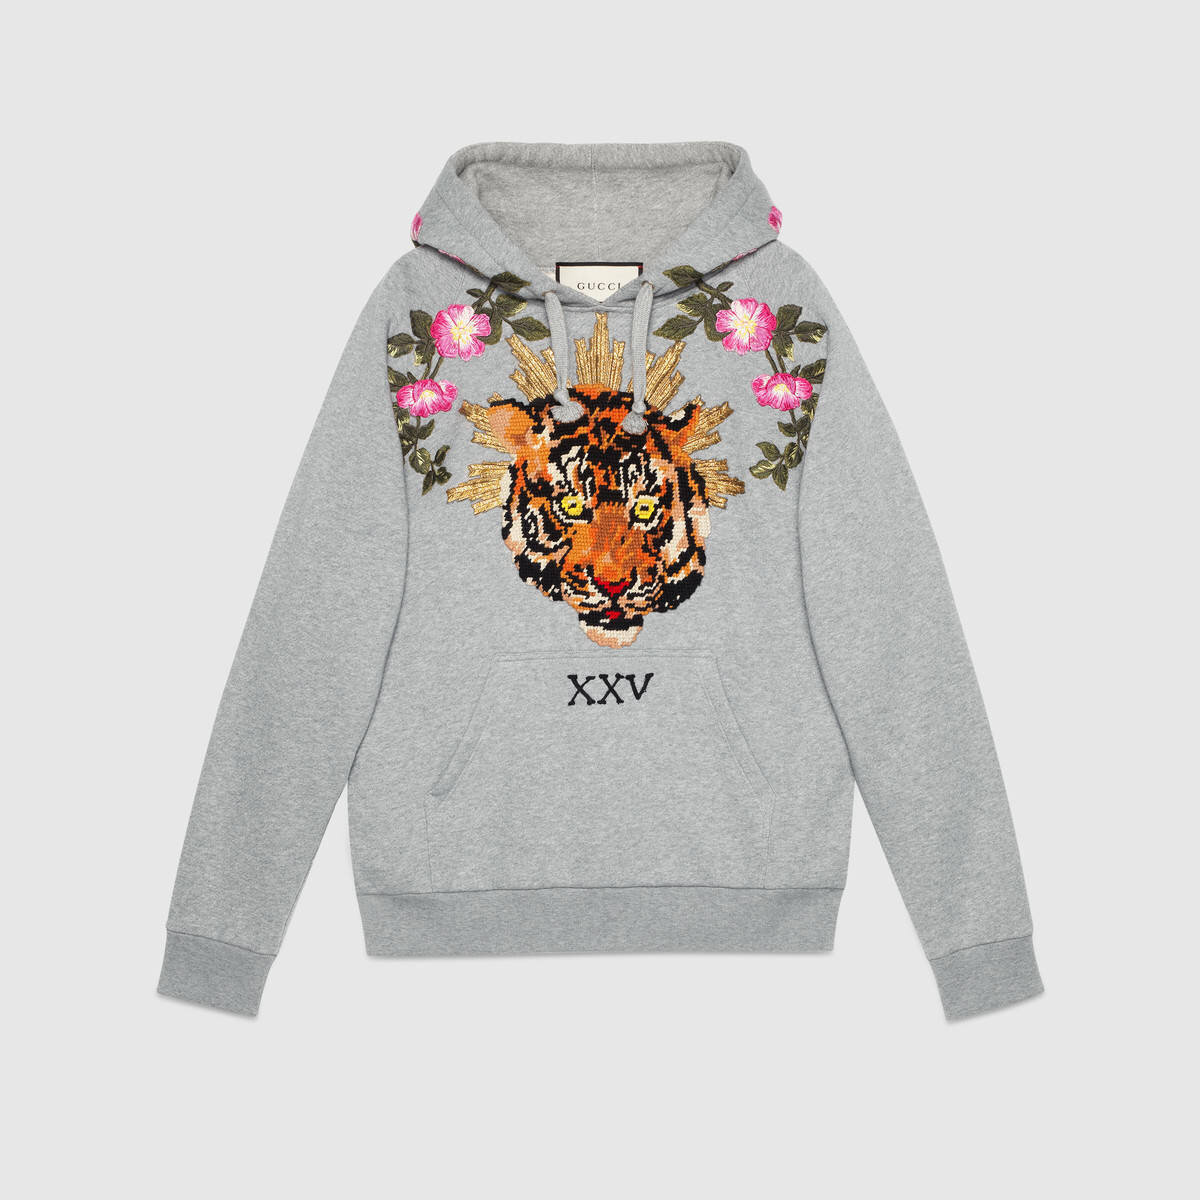 Gucci Tiger Floral-Embroidered Hooded Sweatshirt.jpg